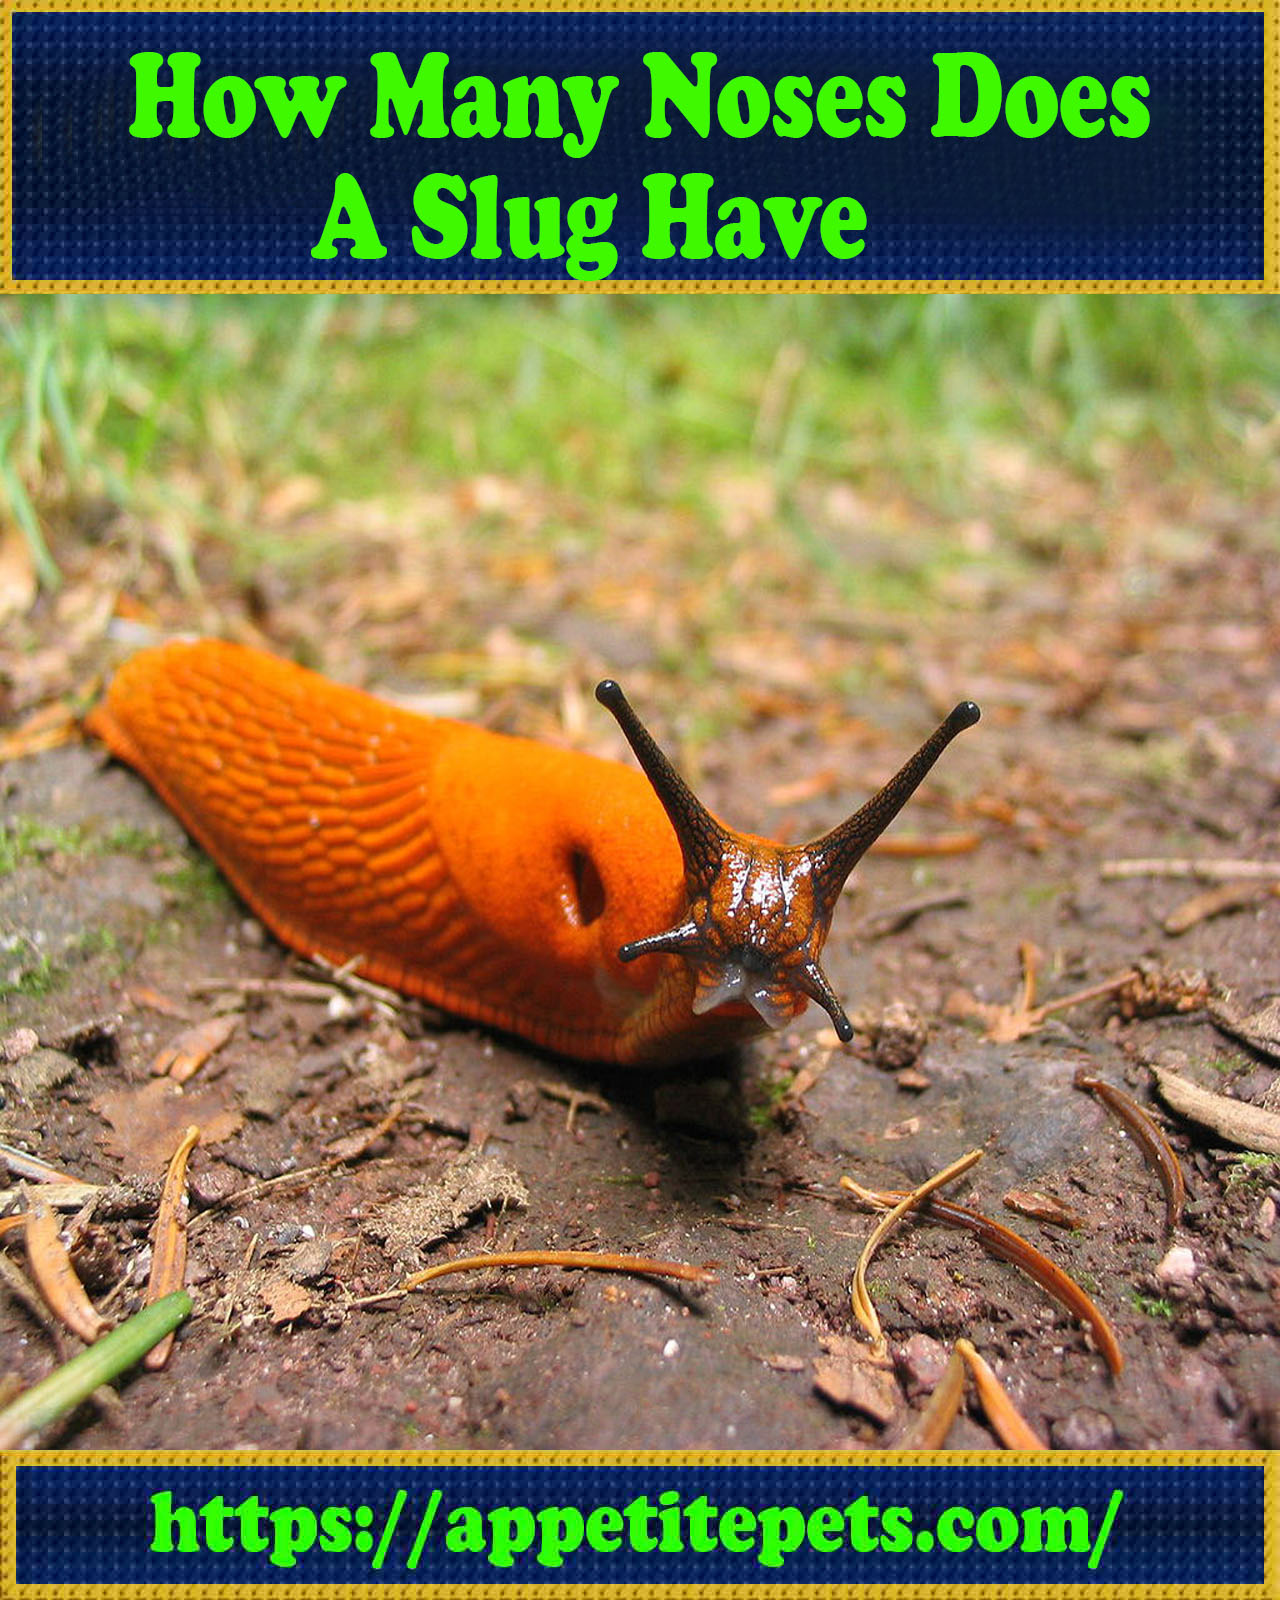 How Many Noses Does a Slug Have